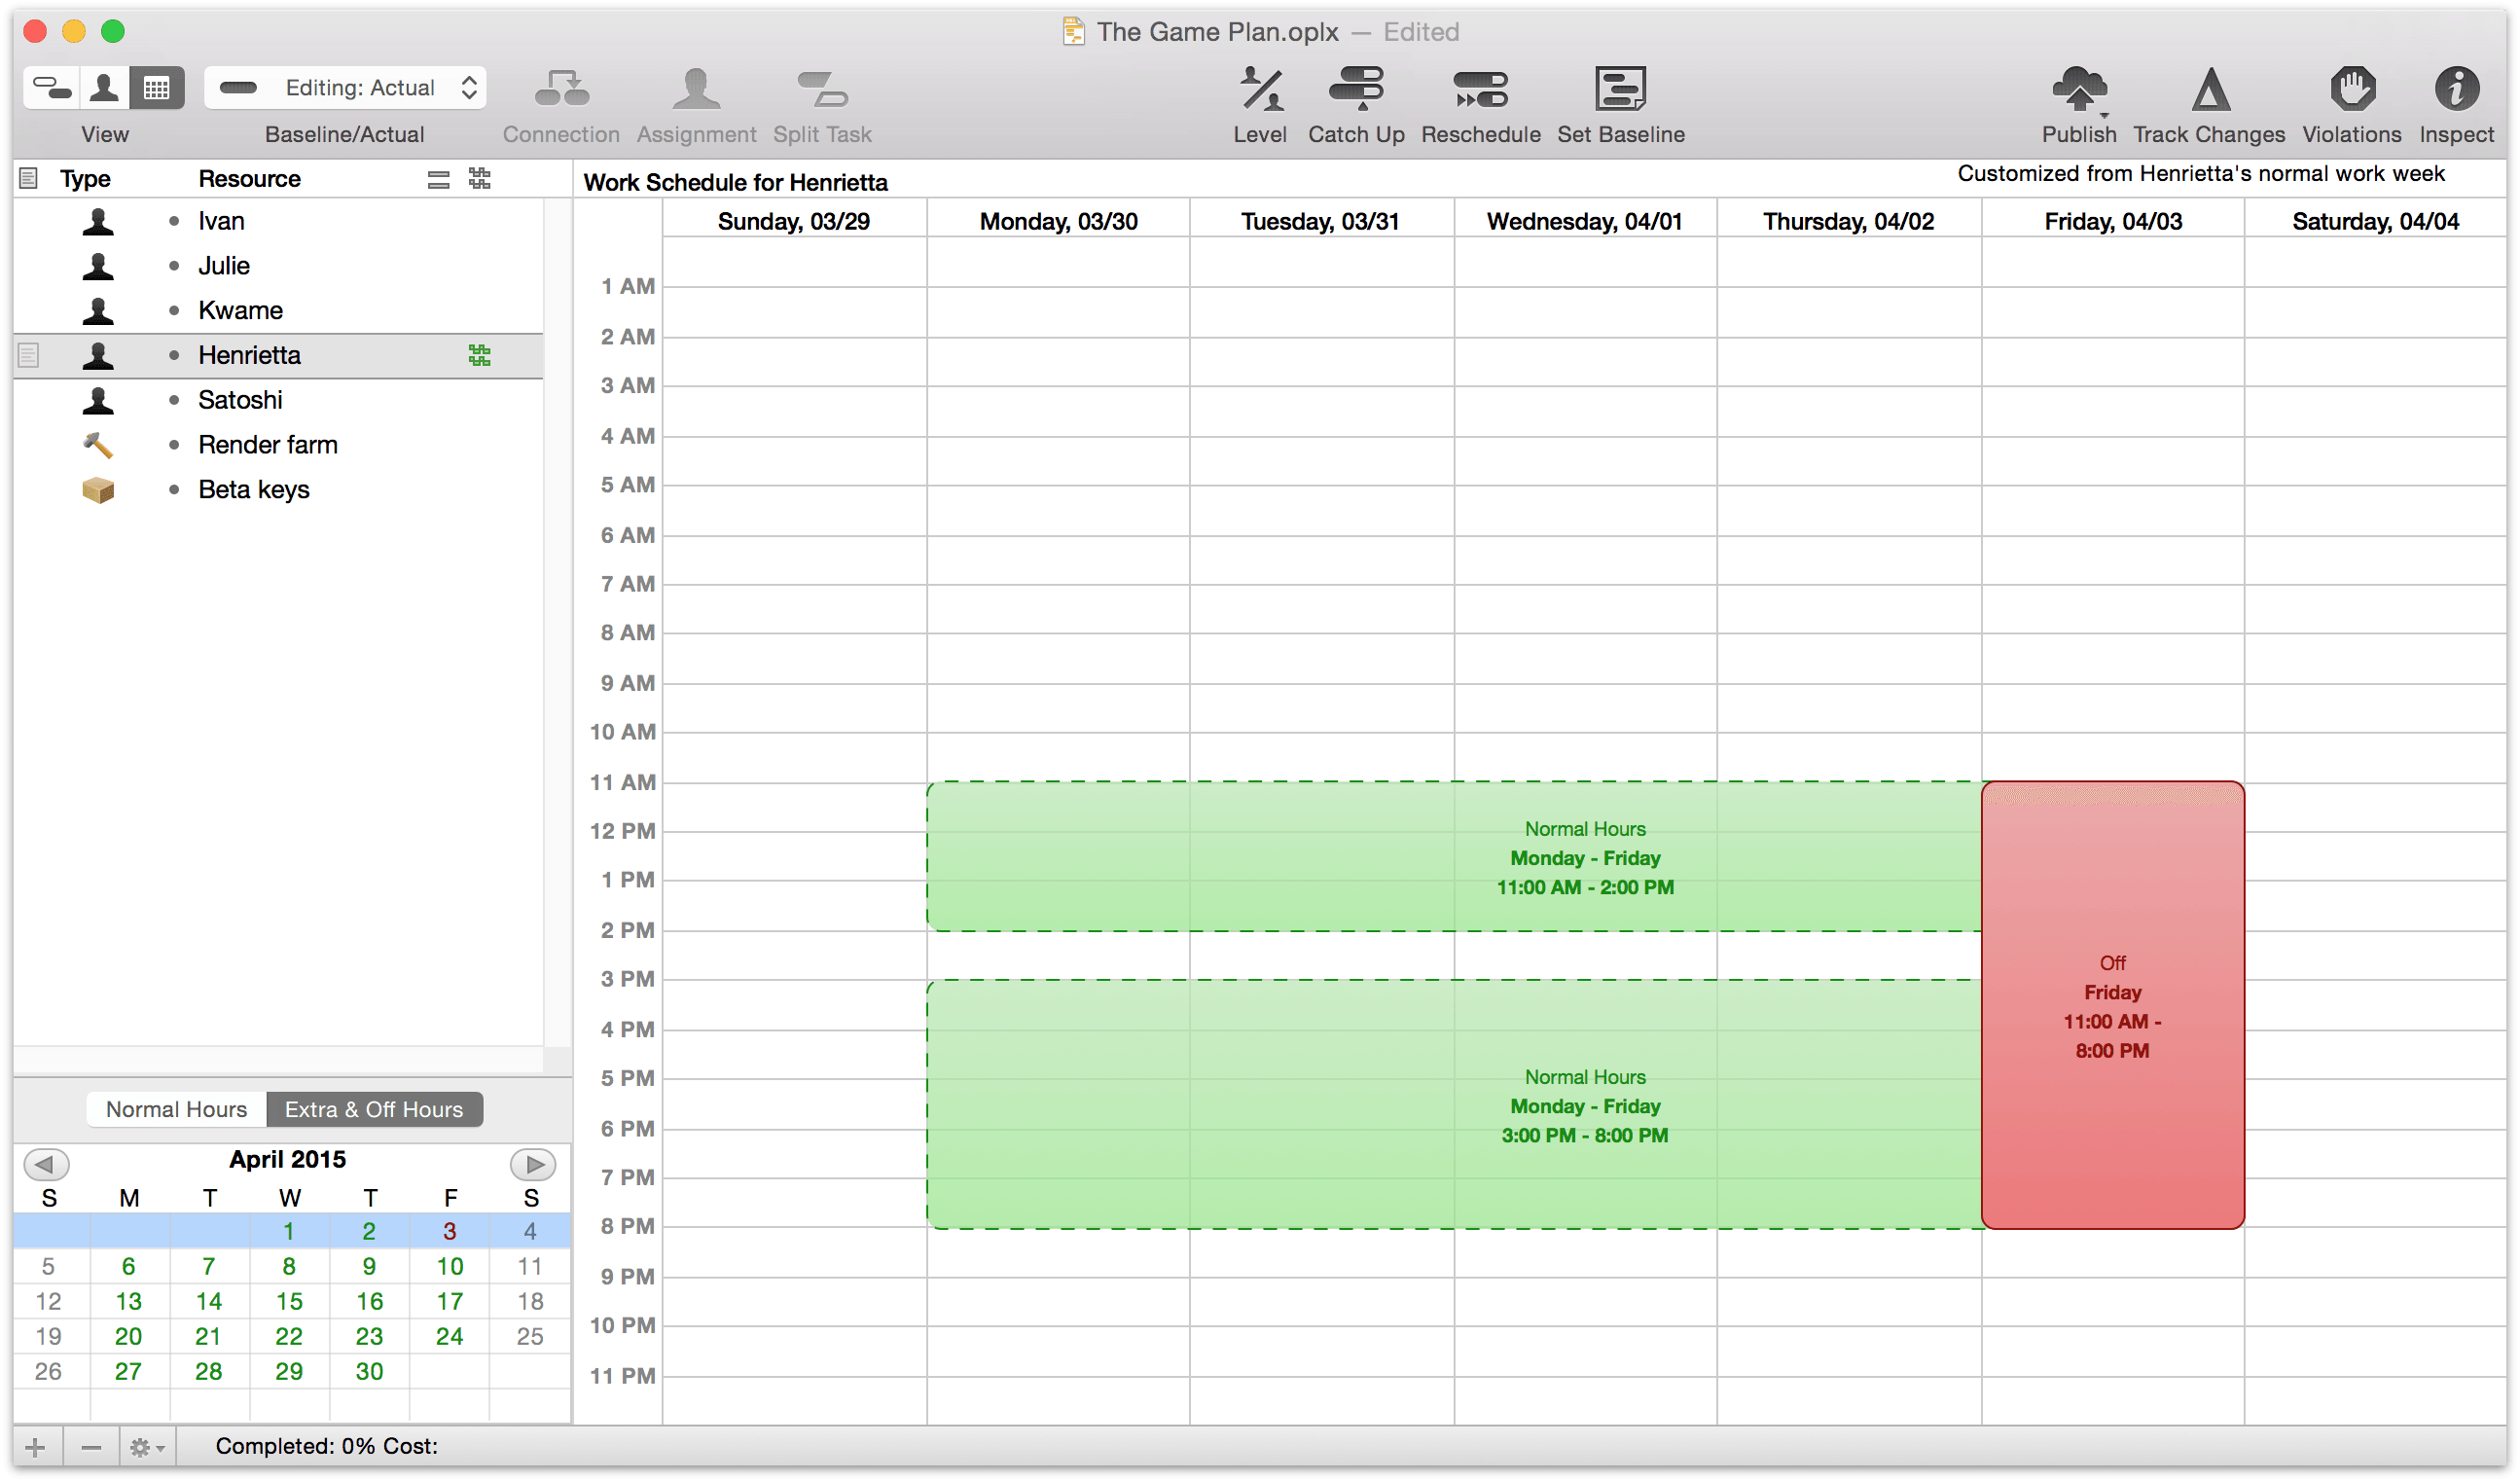 Describing vacation time for an individual staff member in Calendar view.